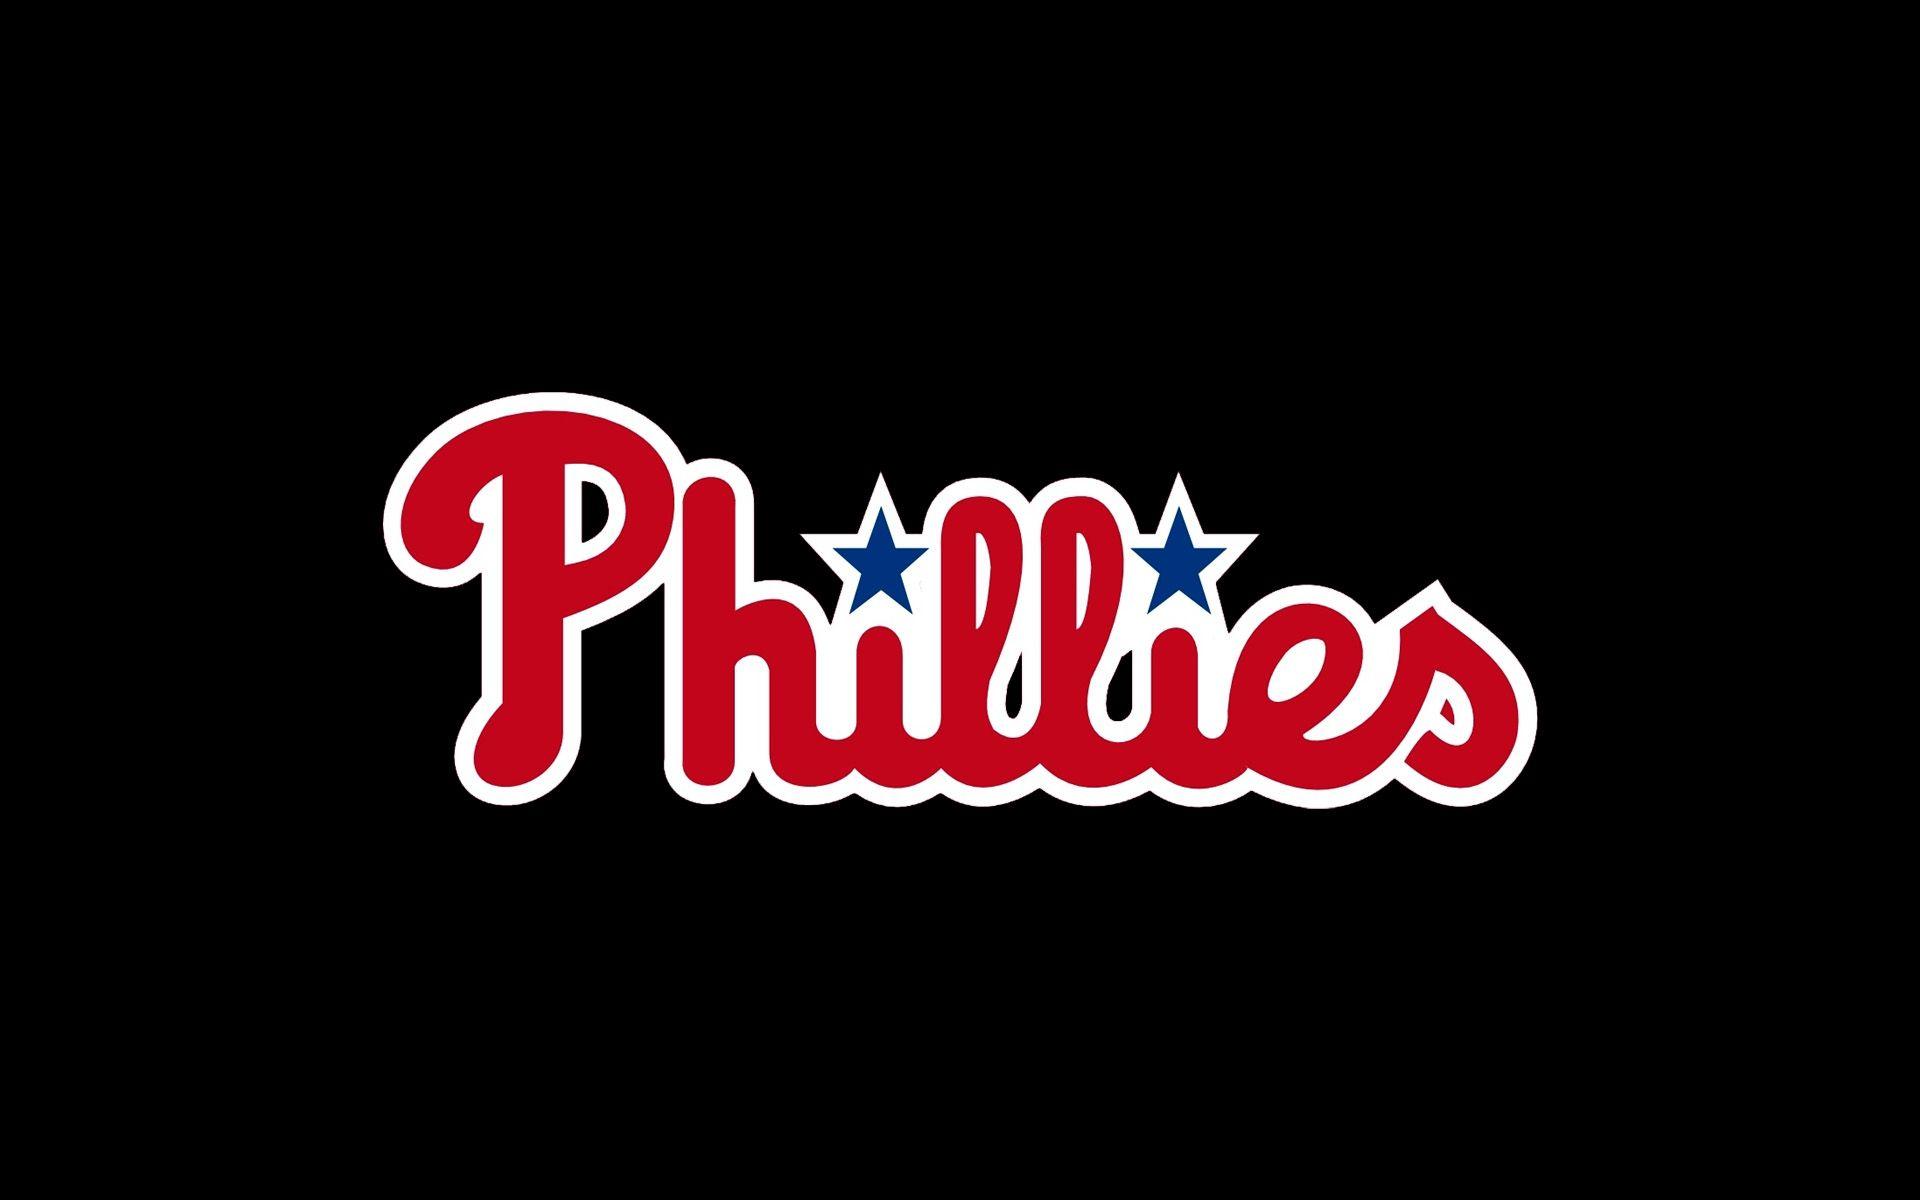 phillies logo wallpaper / Wallpaper Country 690 high quality